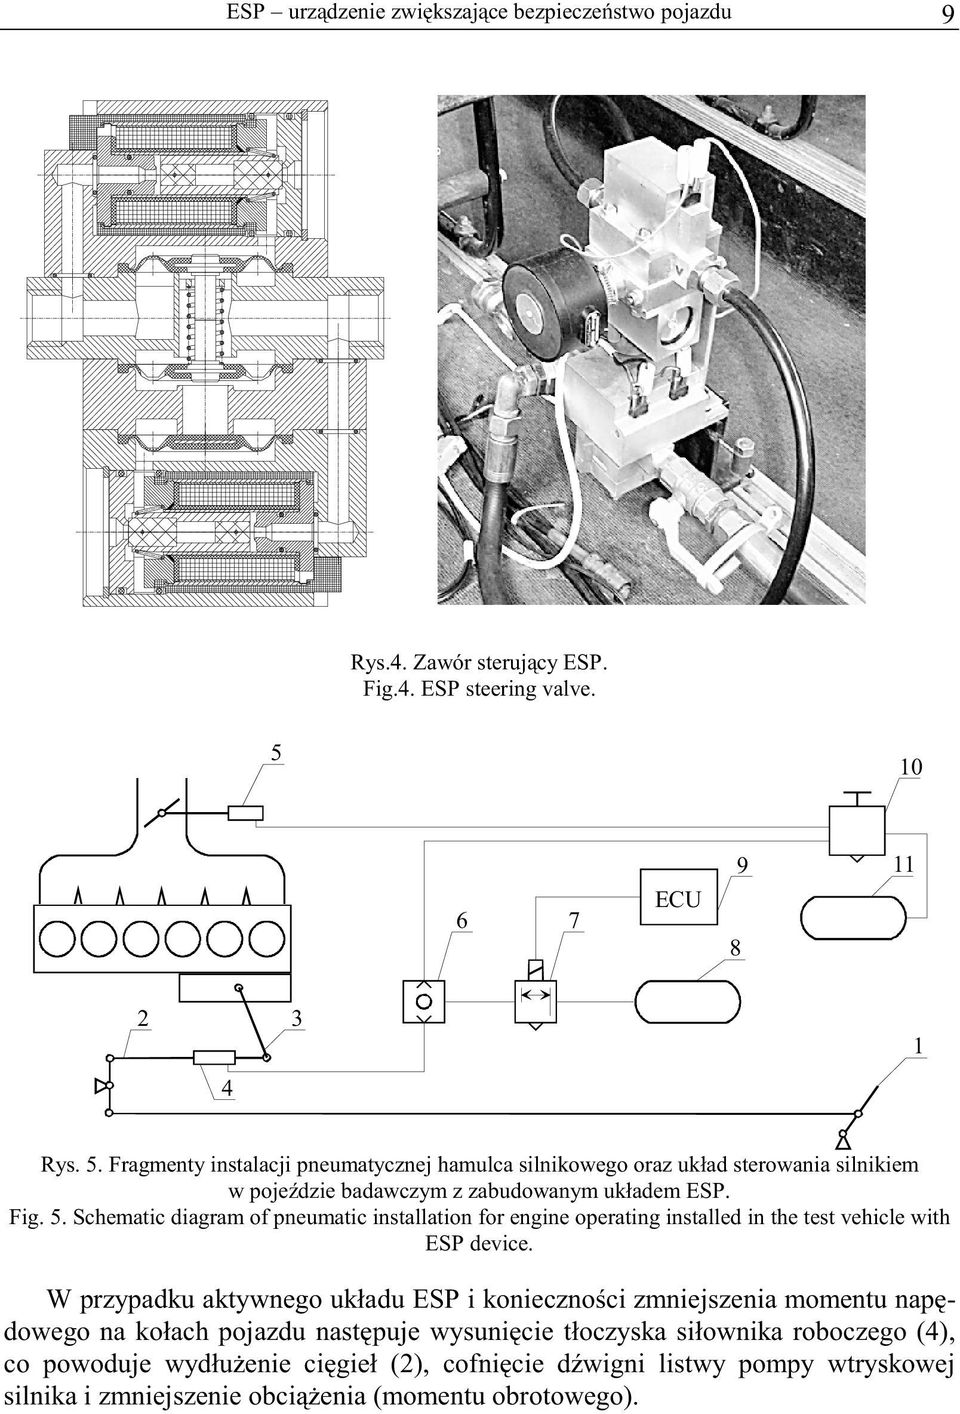 Fig. 5. Schematic diagram of pneumatic installation for engine operating installed in the test vehicle with ESP device.